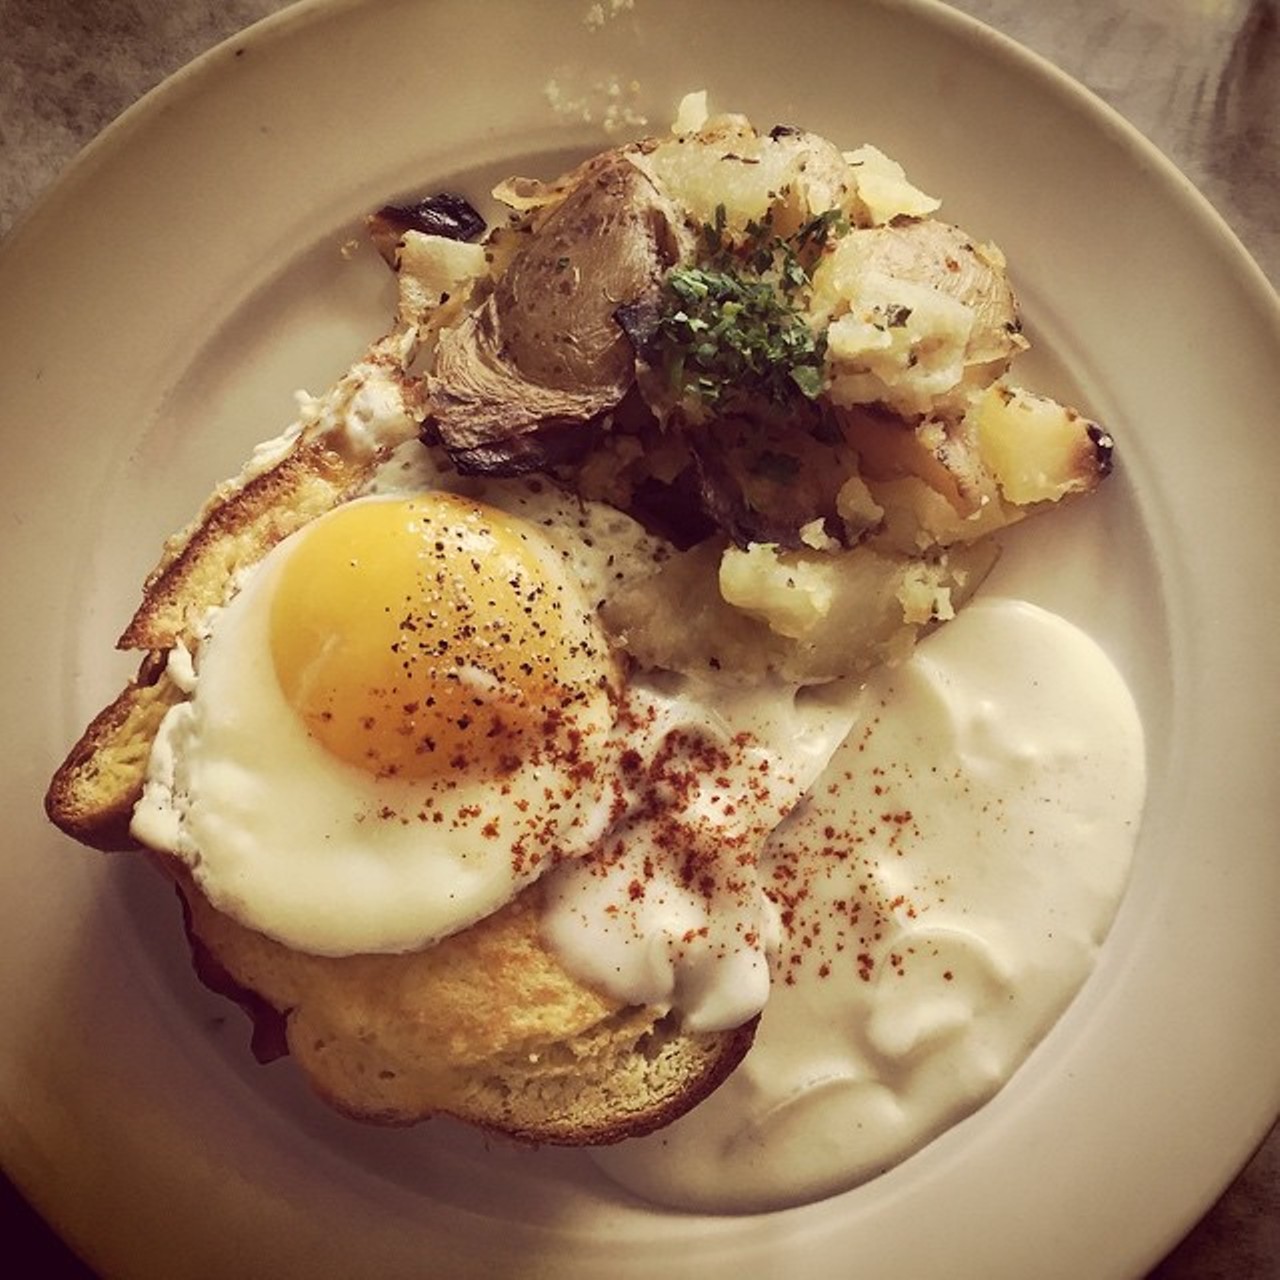 Croque Madame at Le Petit Triangle Cafe. Photo by Bryant Gozali.